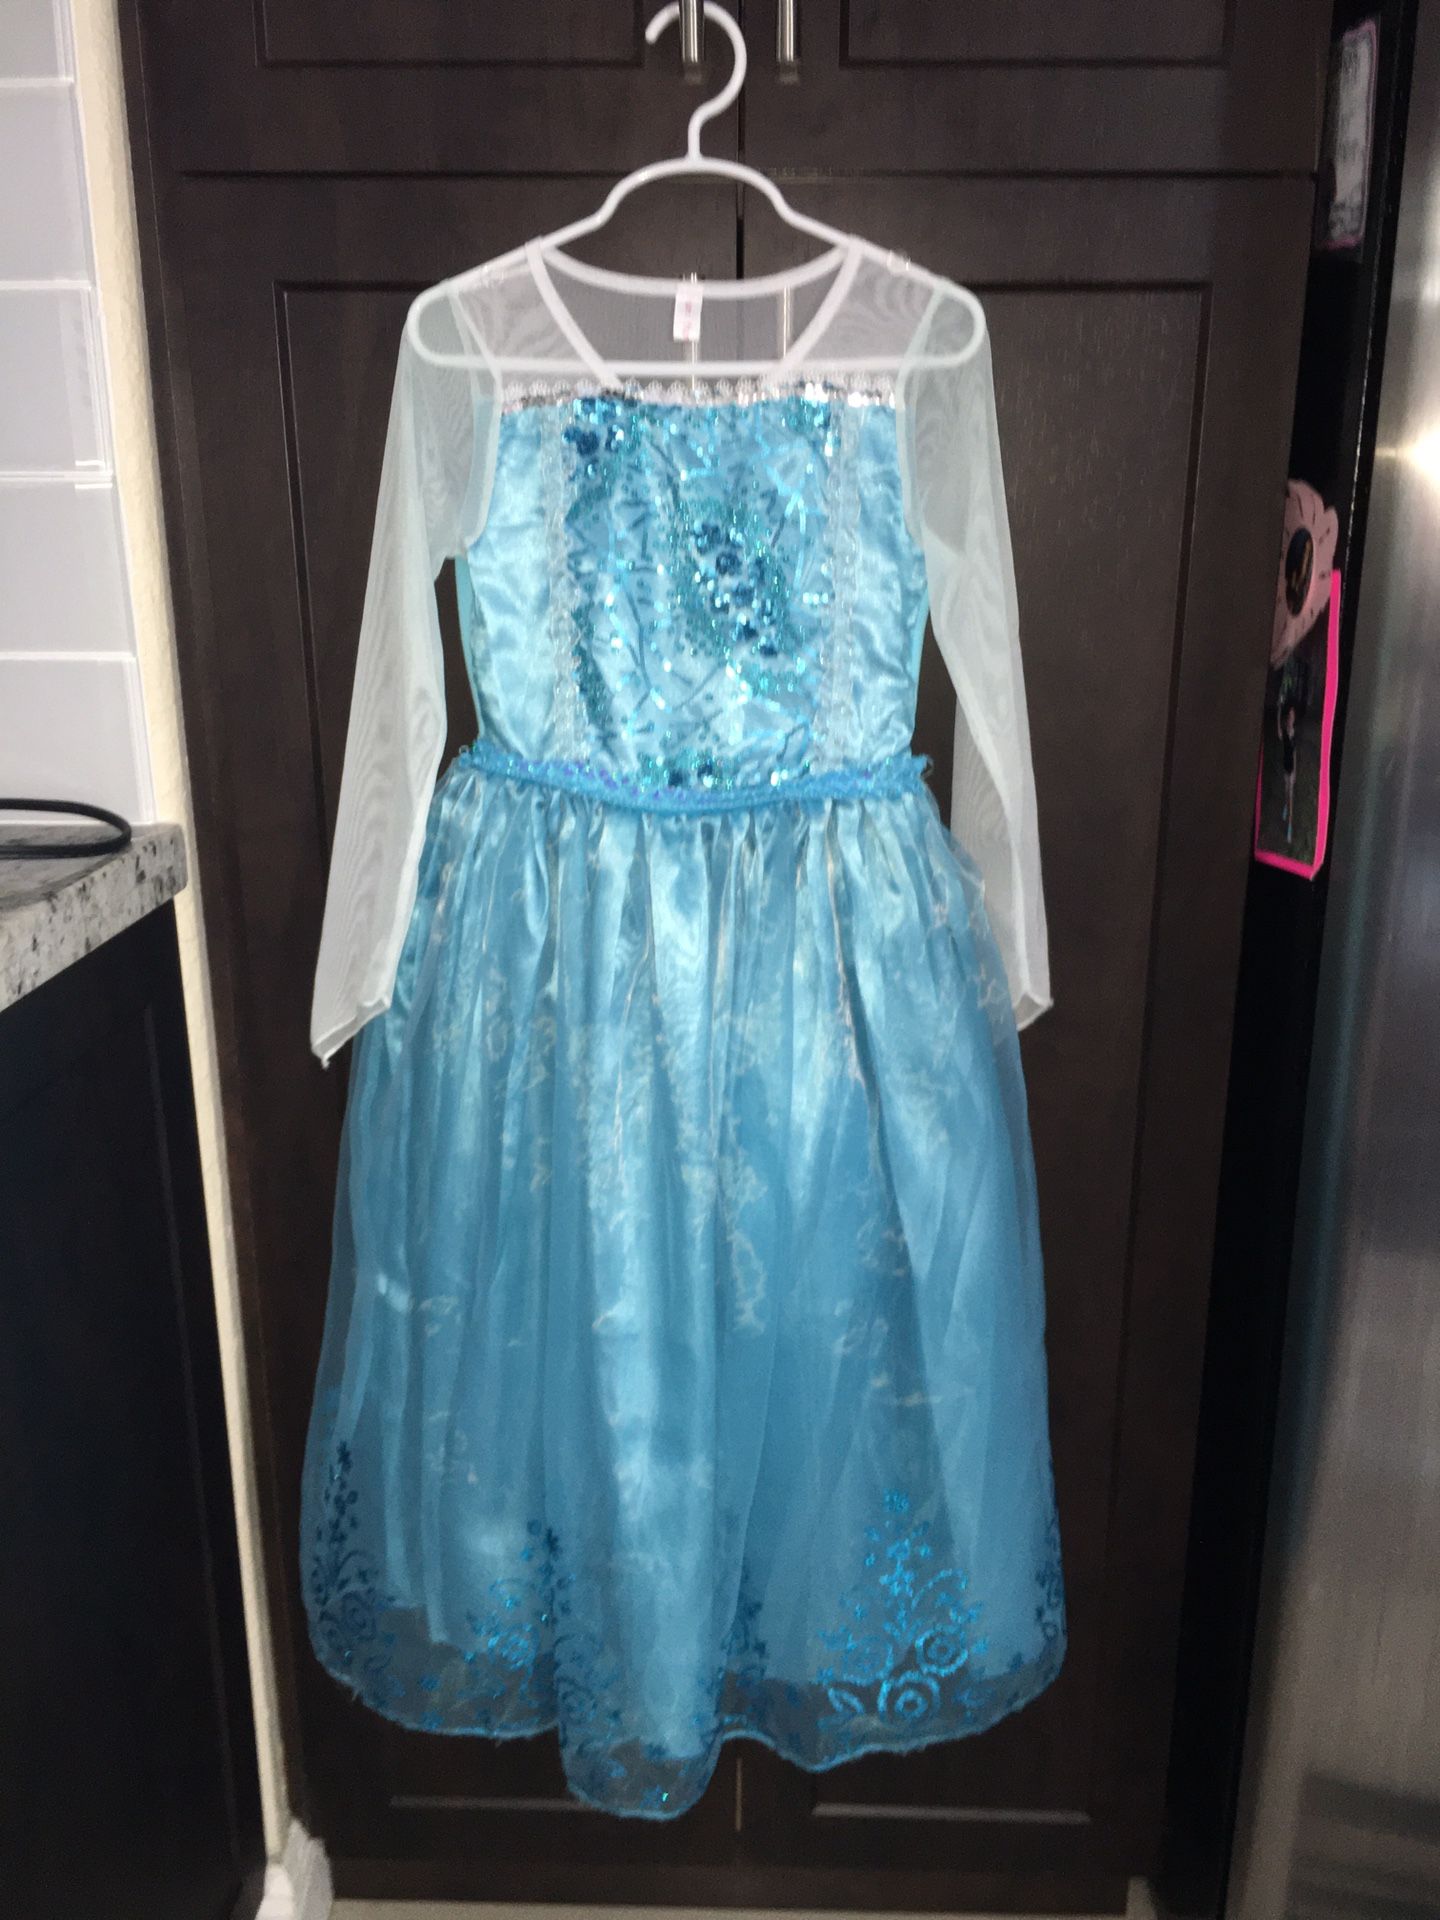 Frozen Elsa princess costumes for girls. Everything you need included, even the shoes.